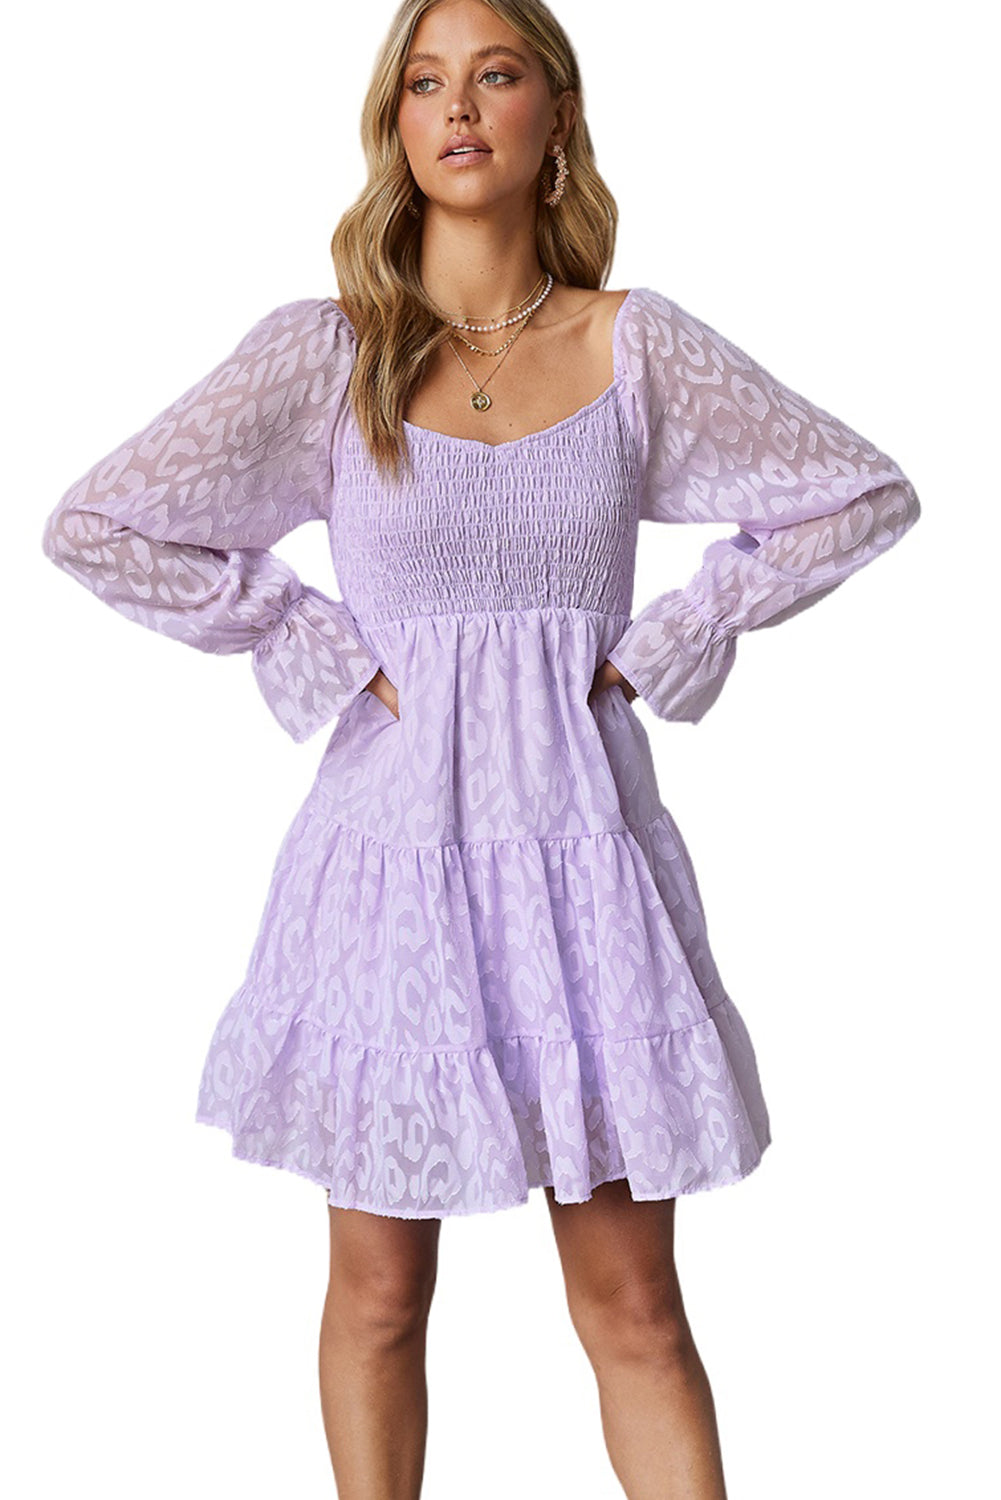 LC6111010-8-S, LC6111010-8-M, LC6111010-8-L, LC6111010-8-XL, Purple Womens Leopard High Waist Smocked Long Sleeve Casual Dresses